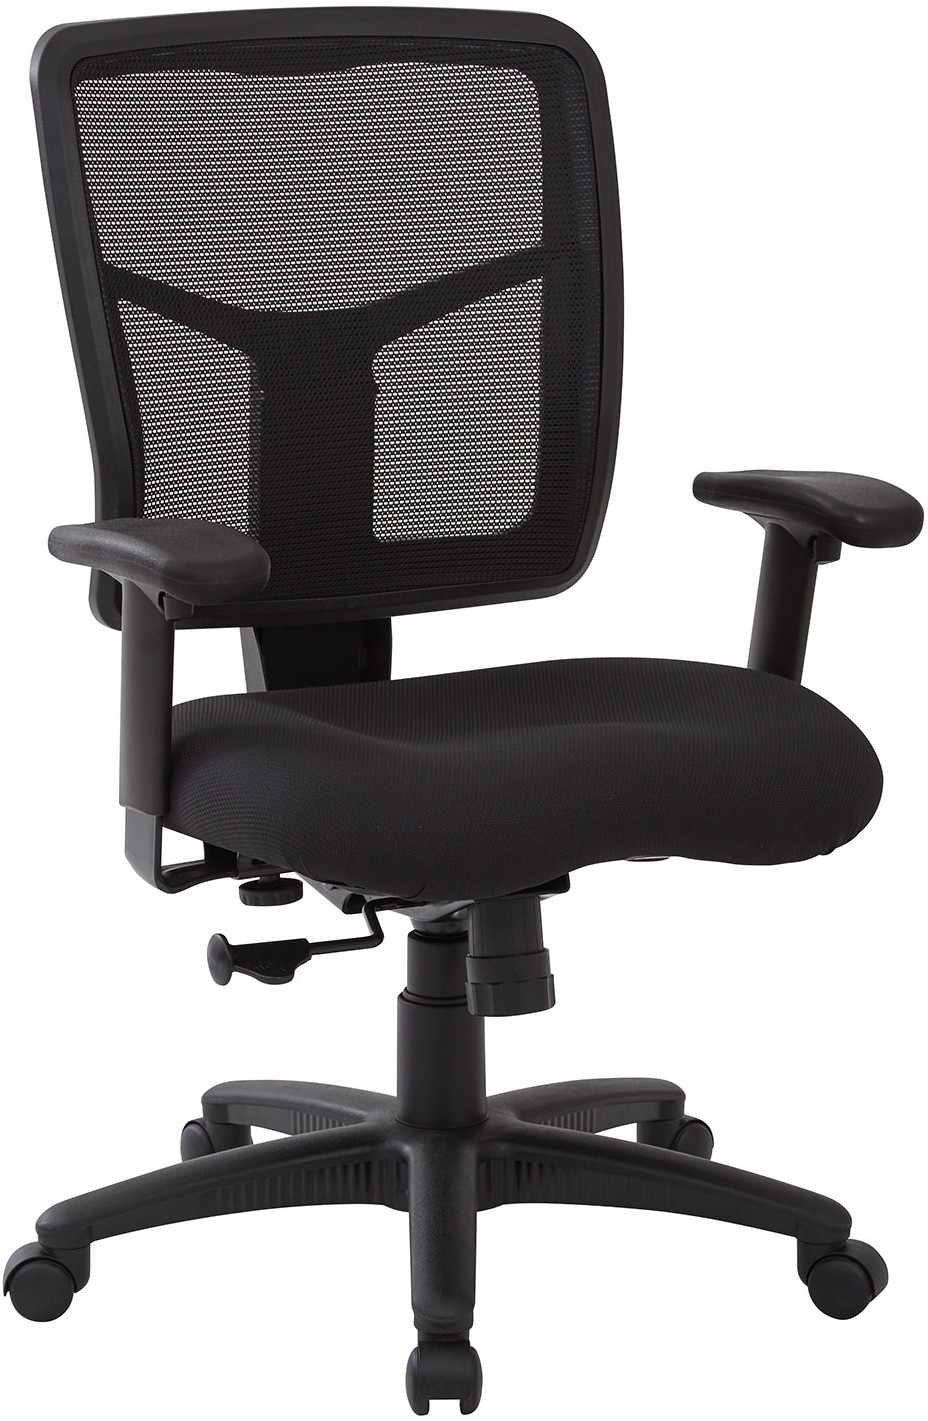 Worksmart SPX Series Manager's Chair SPX82553